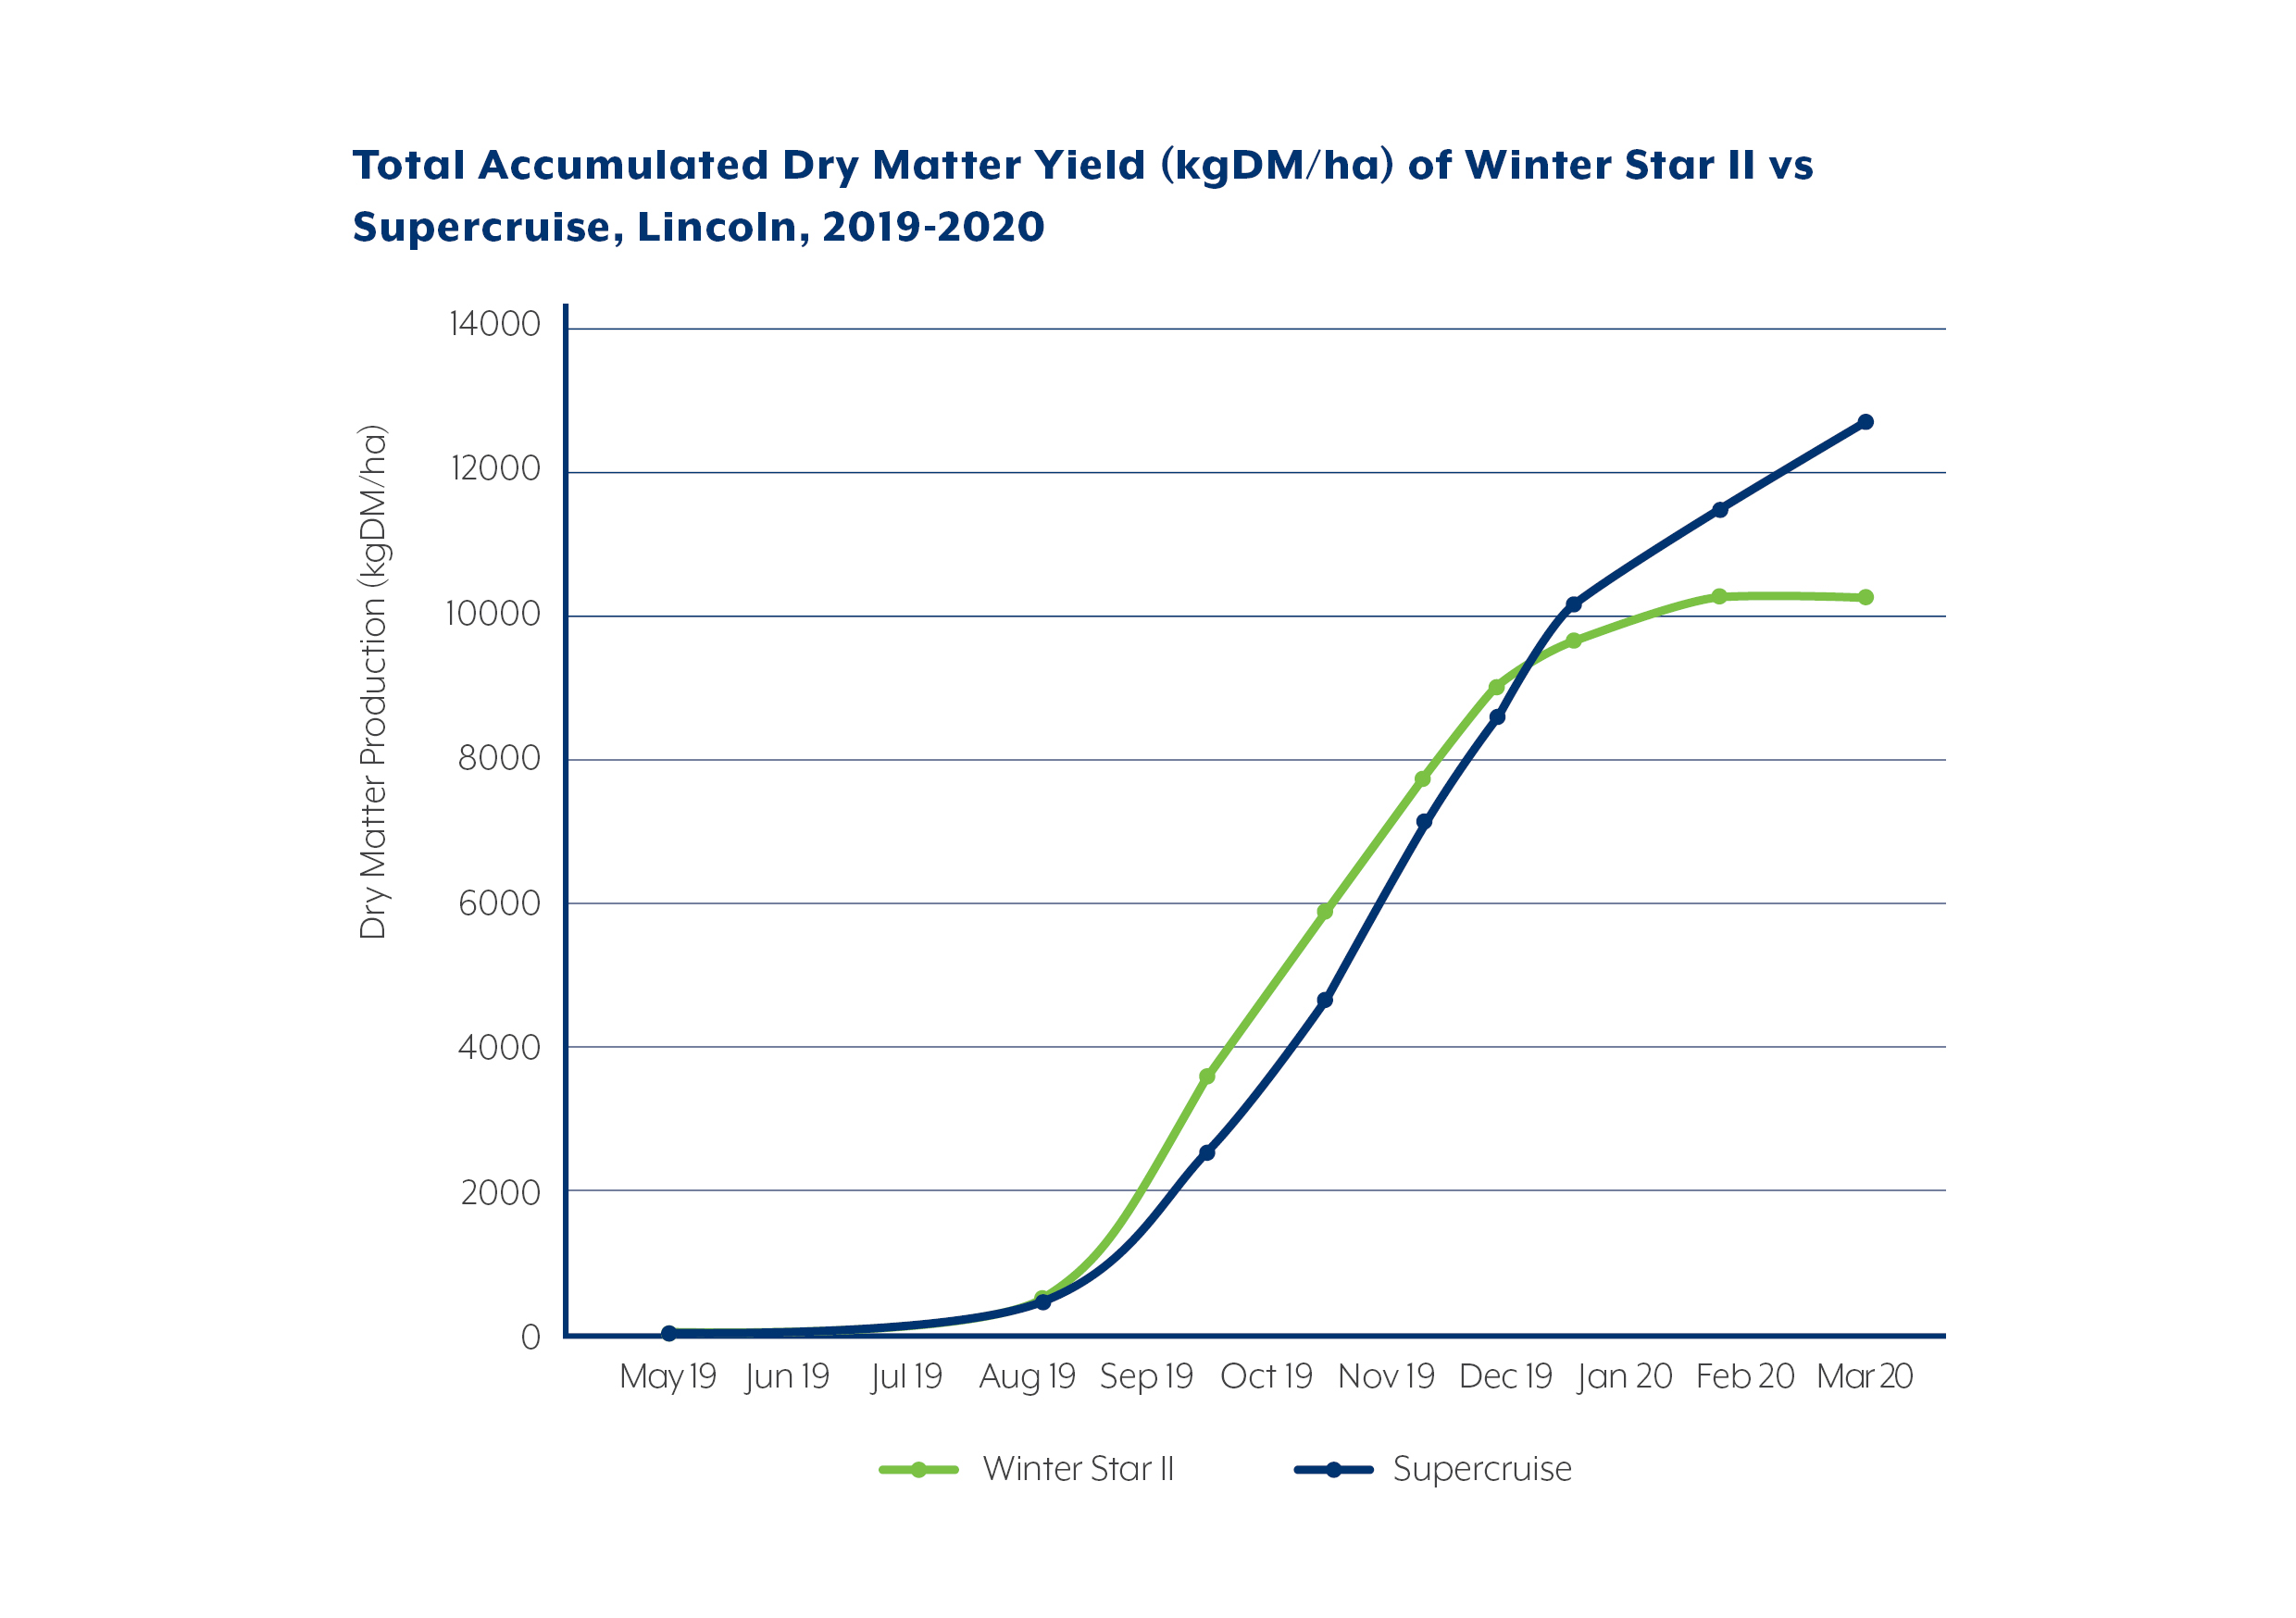 Total_Accumulated_Dry_Matter_Yield_of_Winter_Star_II_vs_Supercruise.jpg